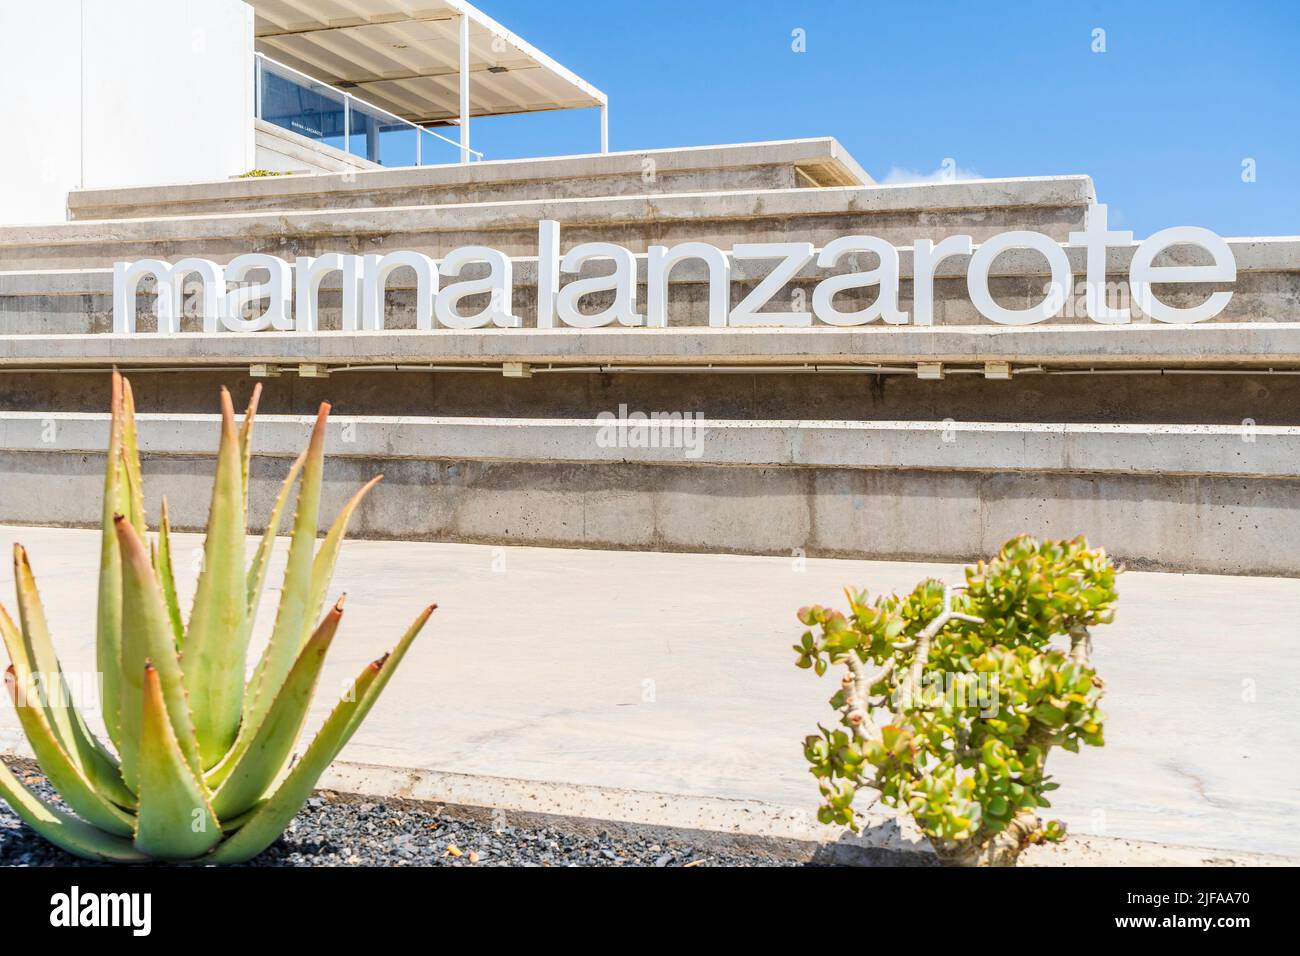 Modern architecture and sign saying Marina Lanzarote in Arrecife, capital city of Lanzarote, Canary Islands, Spain Stock Photo